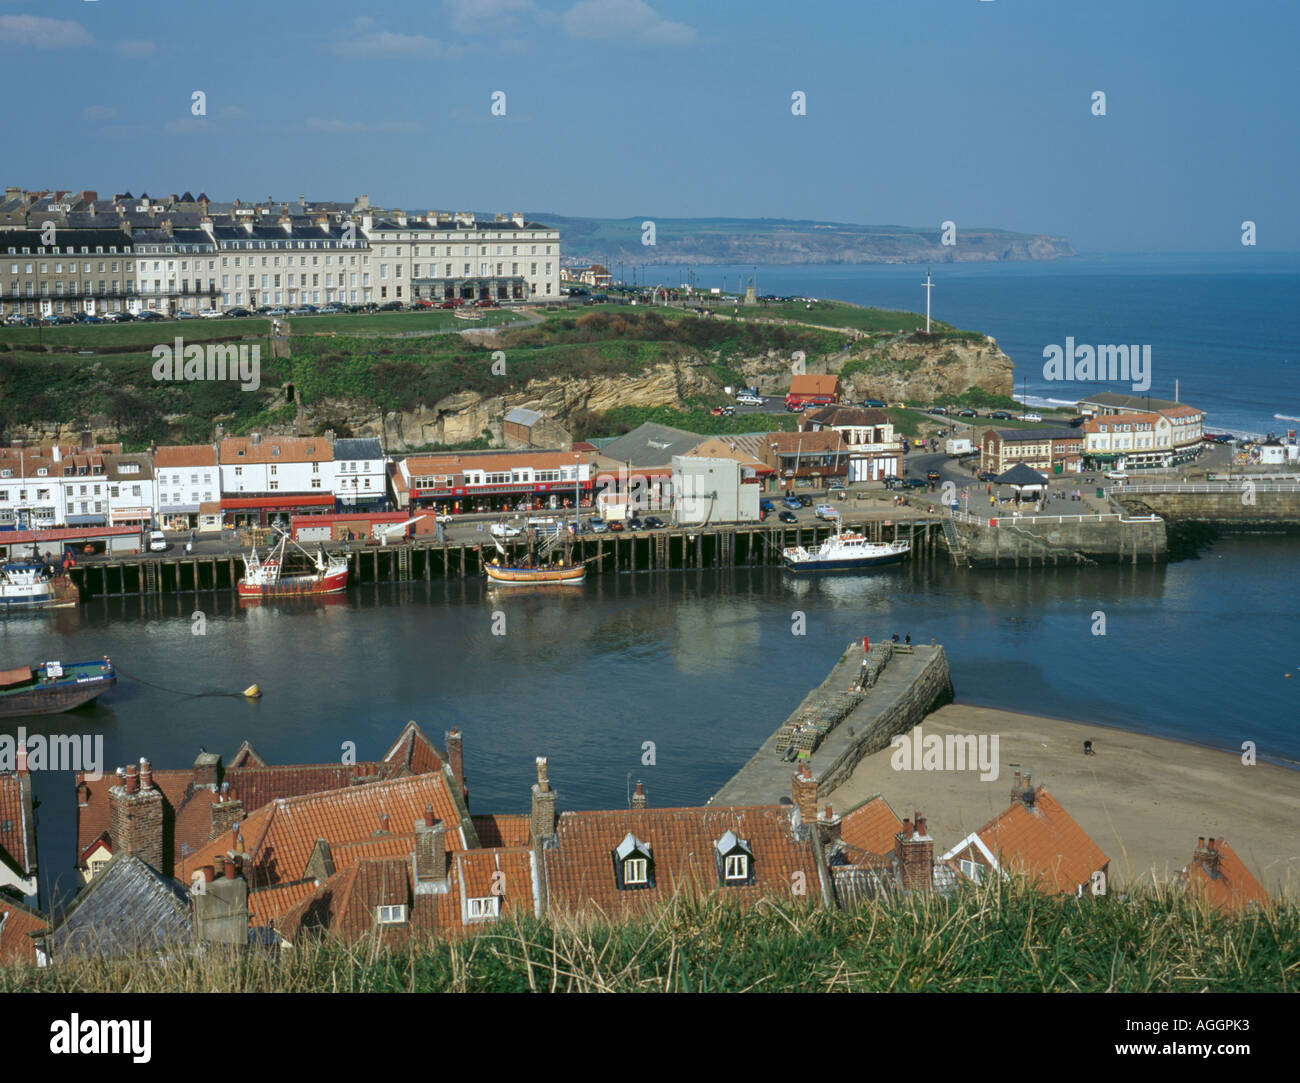 View over Harbour to the West Cliff, with the North Sea beyond, from St Mary's Church, Whitby, North Yorkshire, England, UK Stock Photo